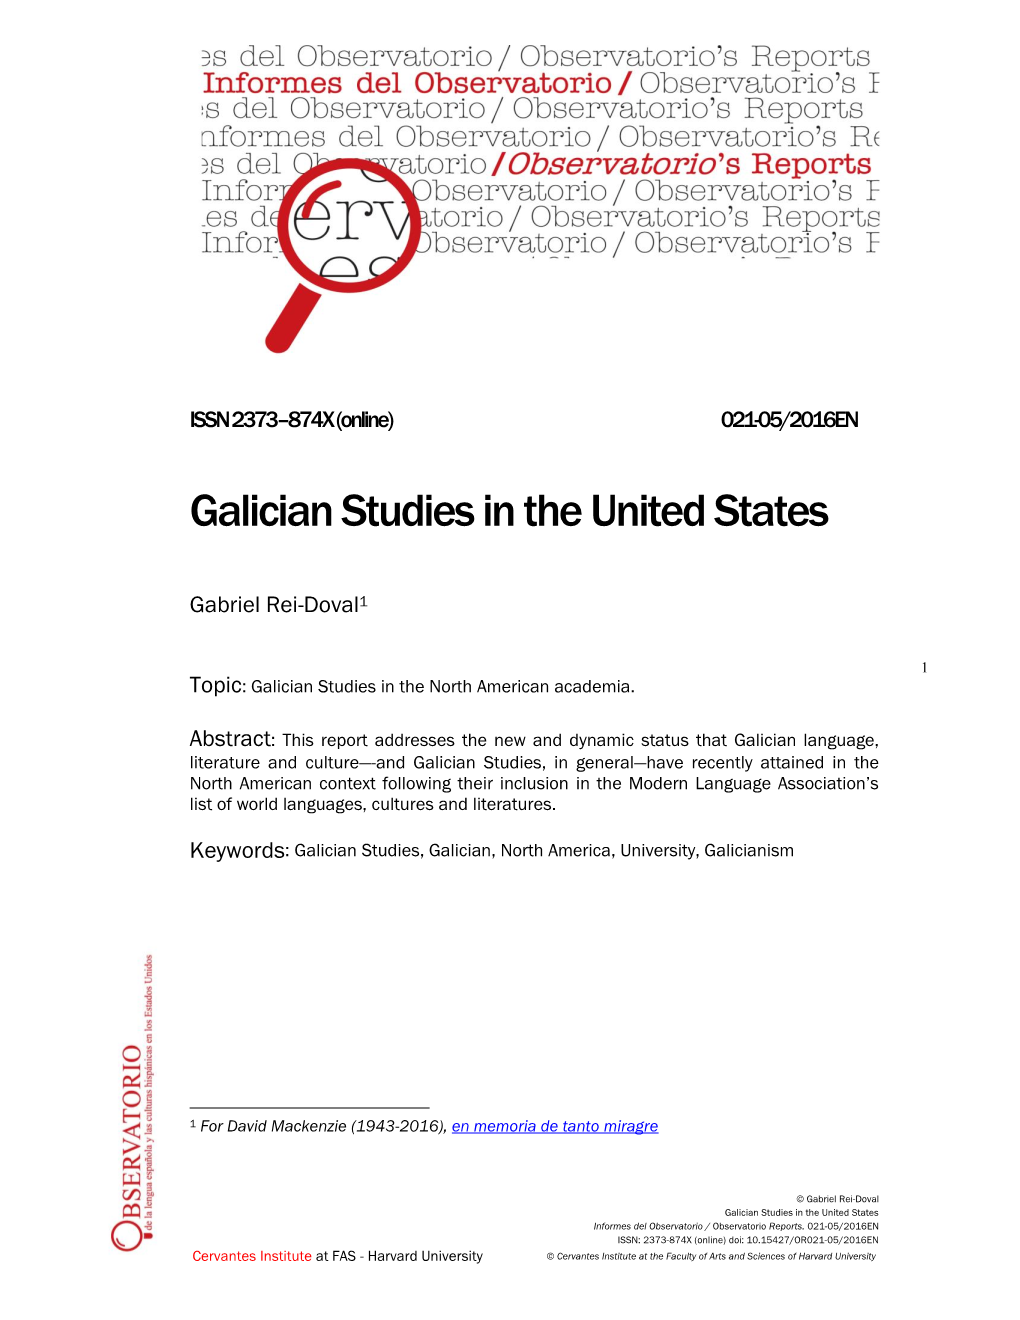 Galician Studies in the United States